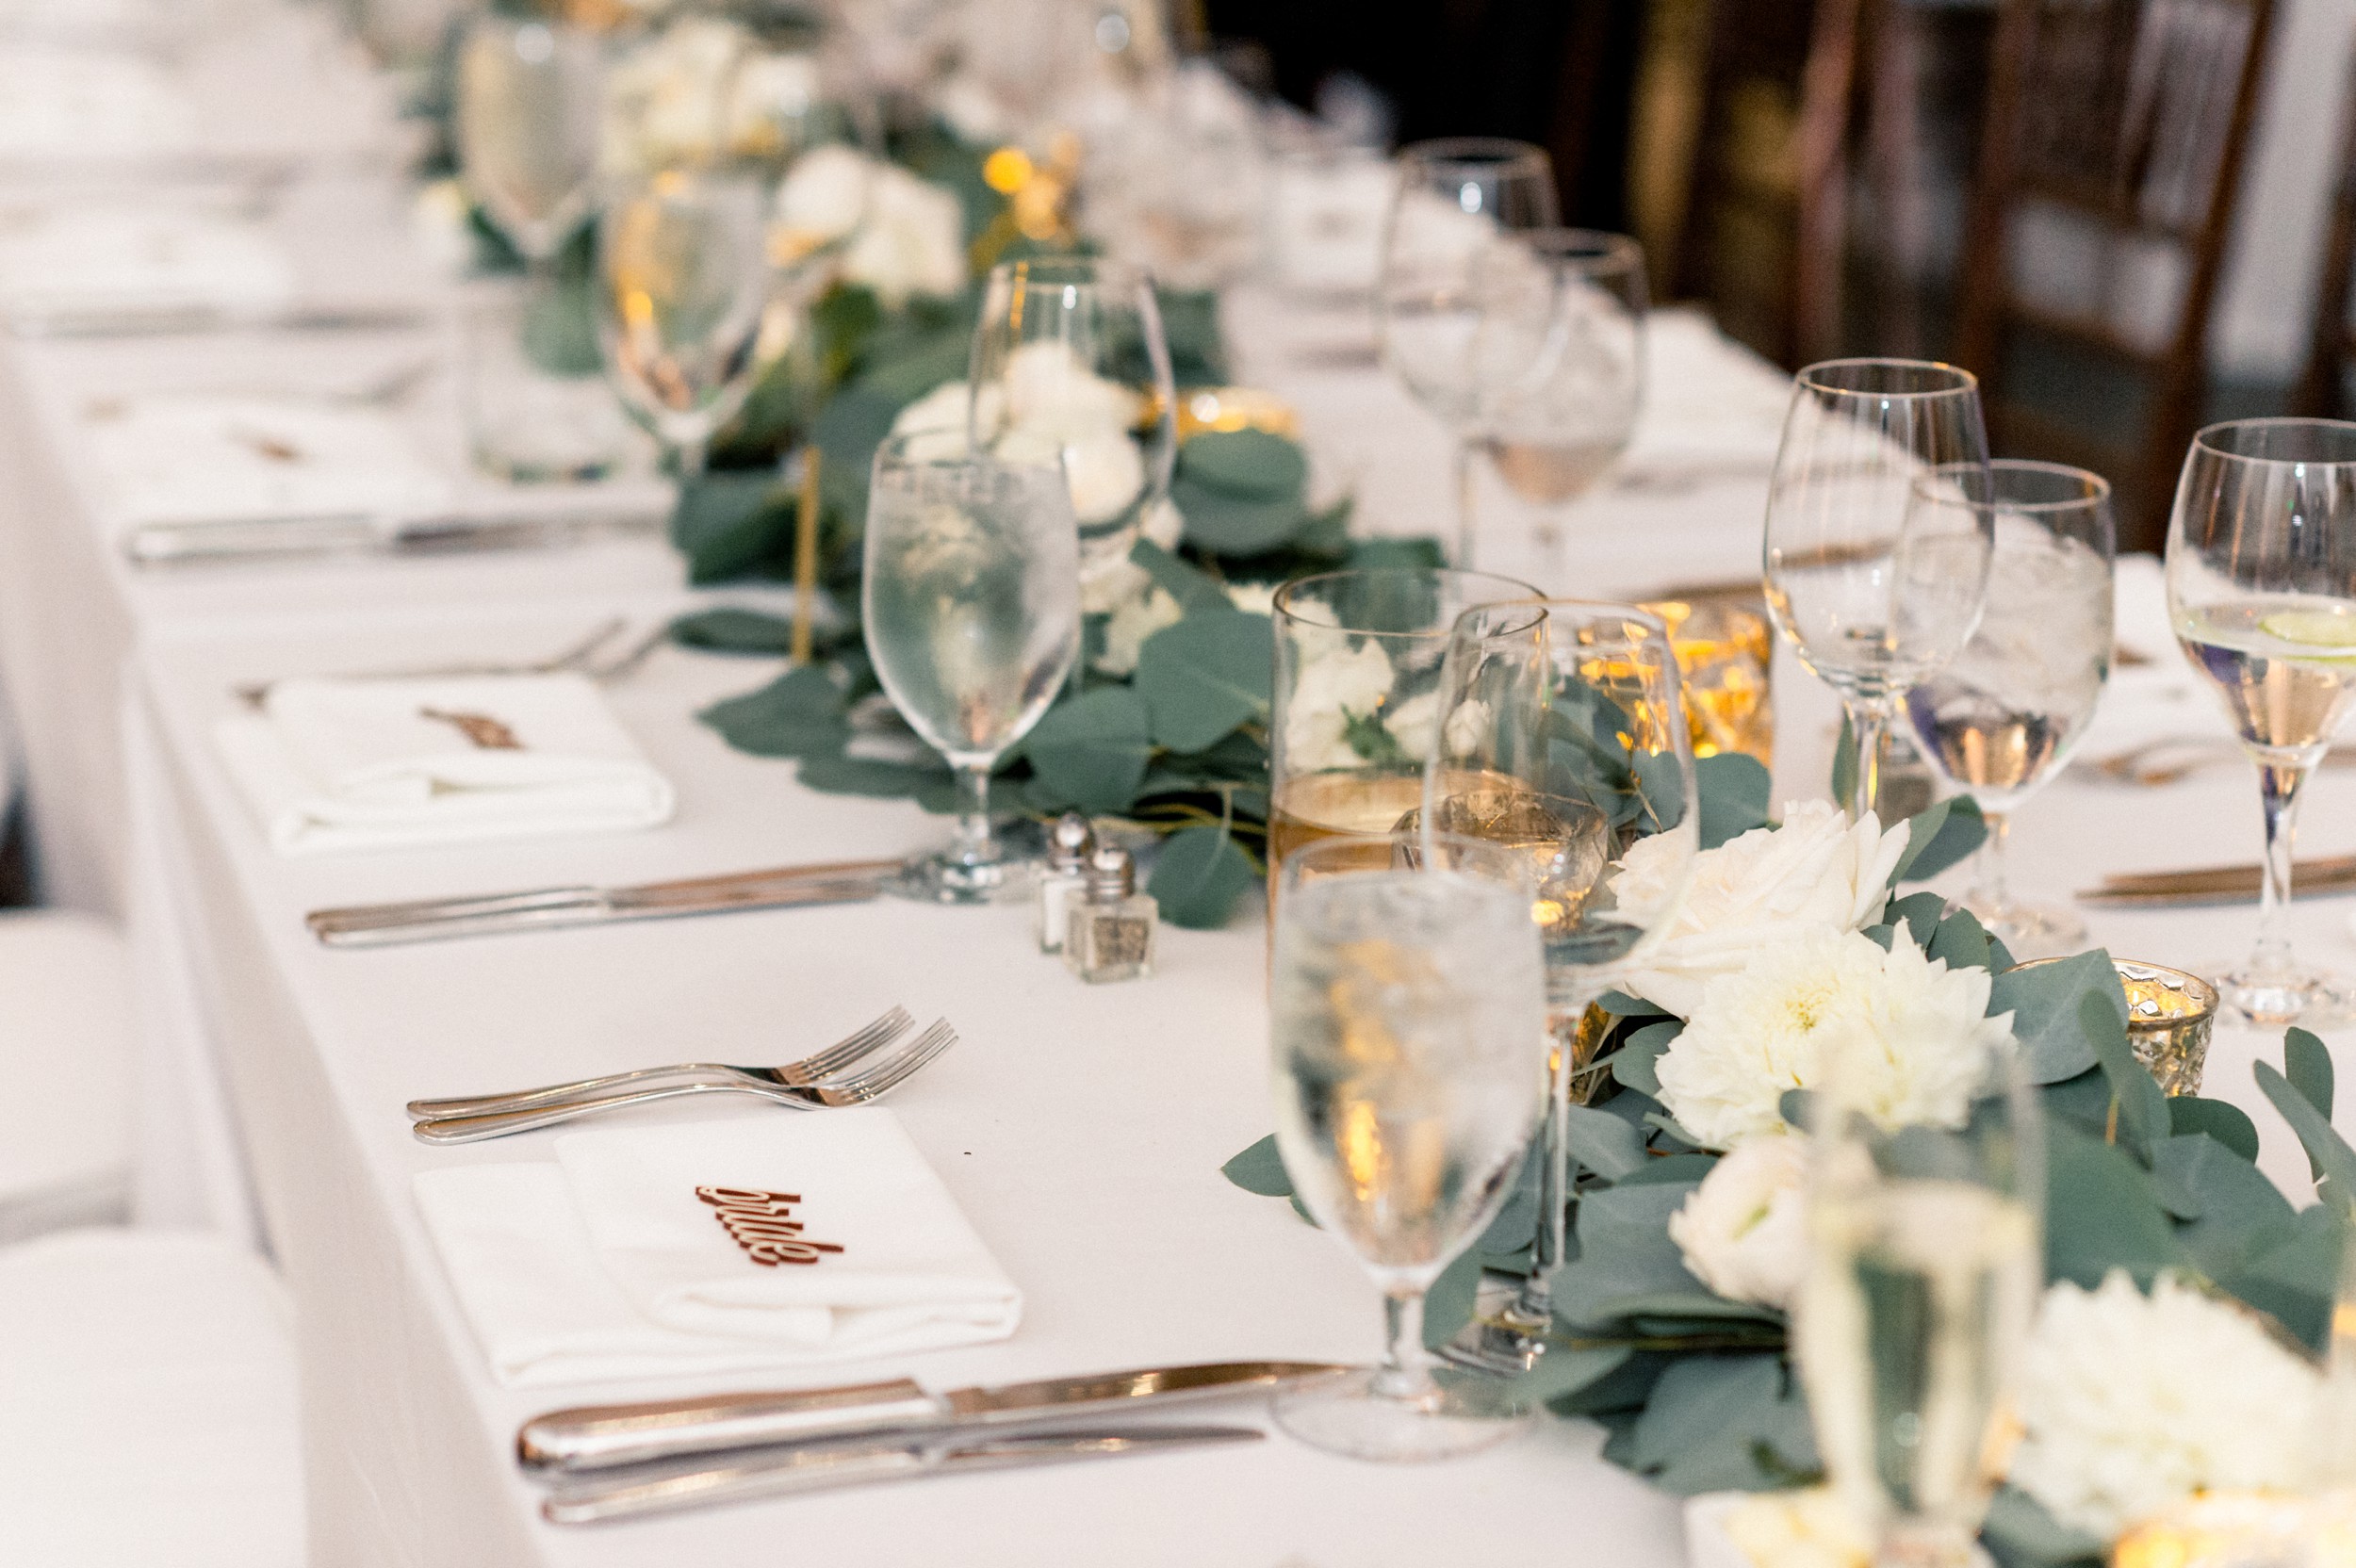 fall florals, candles, and gold table numbers for a black tie Boston wedding at harvard art museum